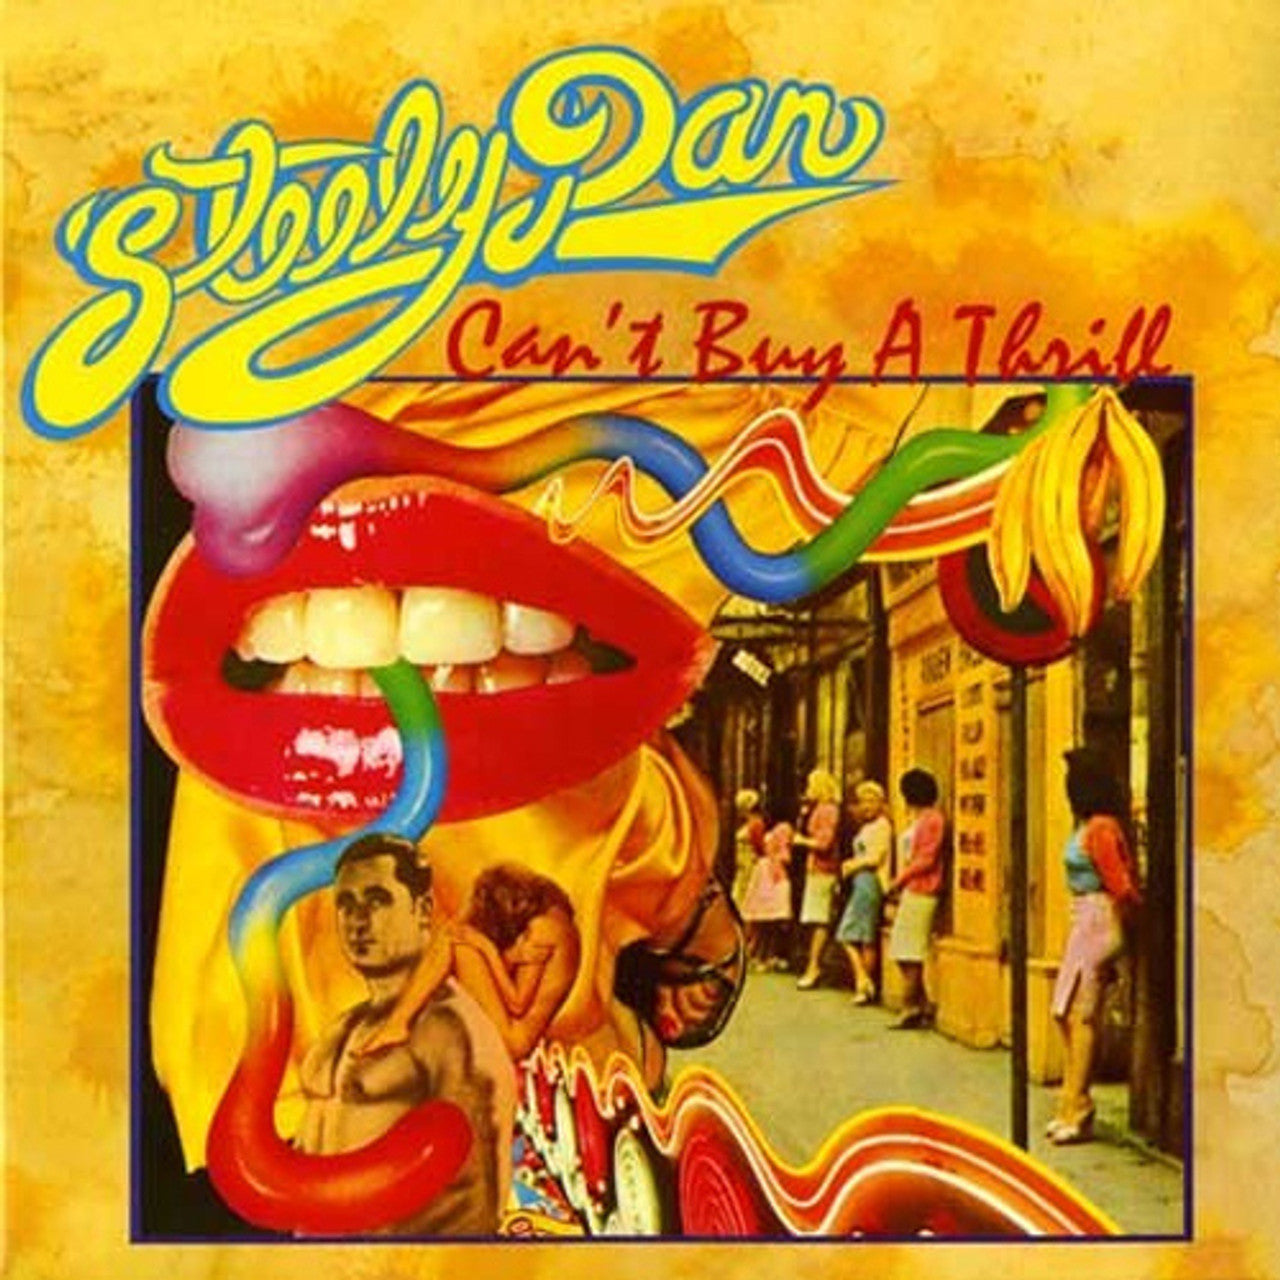 Steely Dan - Can't Buy a Thrill - LP